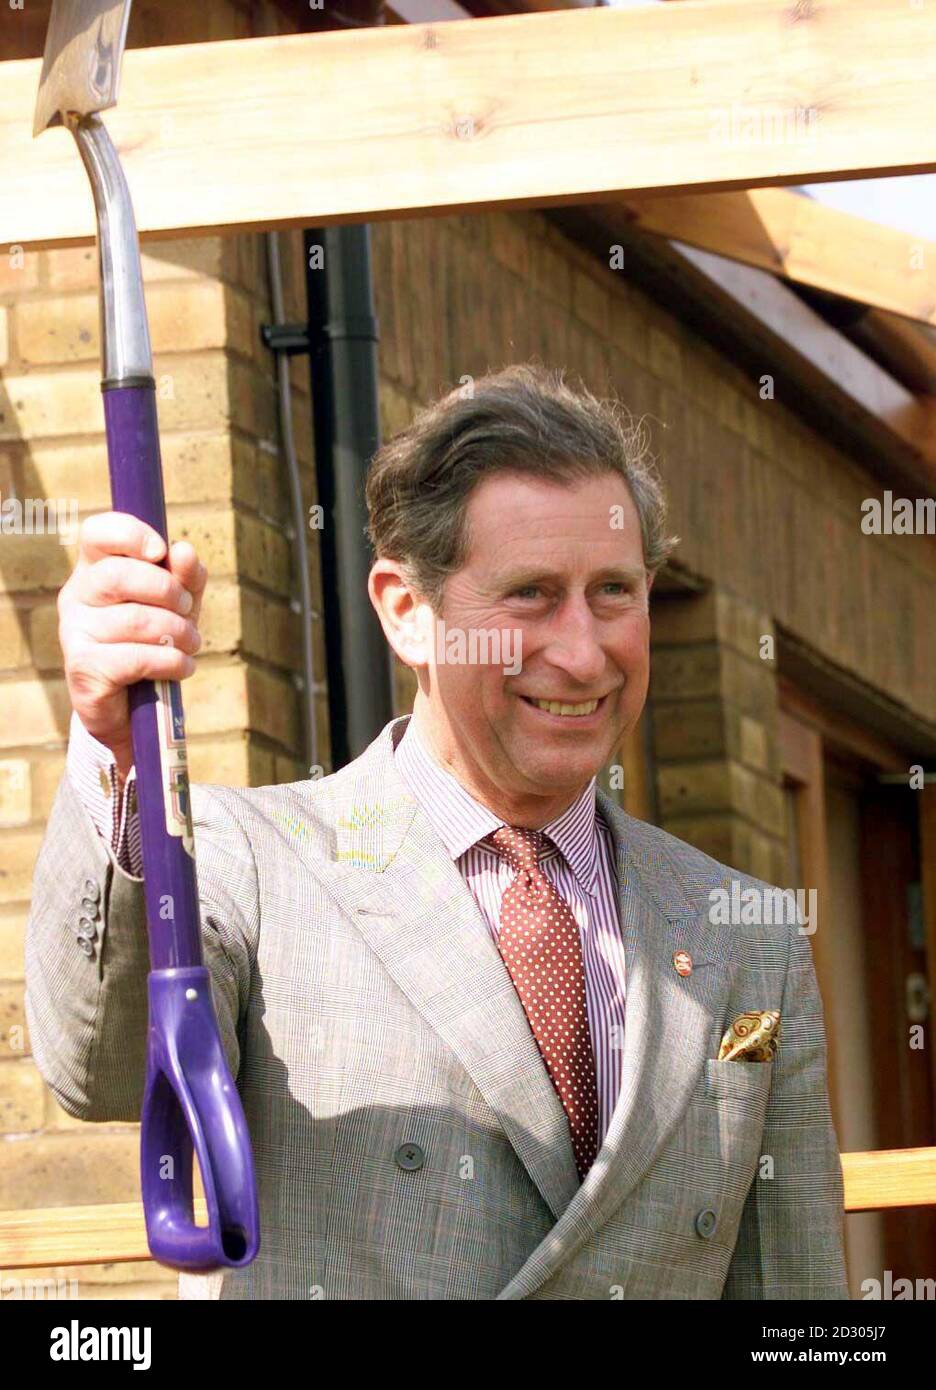 The Prince of Wales holds aloft a spade after planting a holly tree during a visit to the Macmillan cancer care centre in Guildford today (Wednesday). PA Photos (Reuter rota pic) Stock Photo